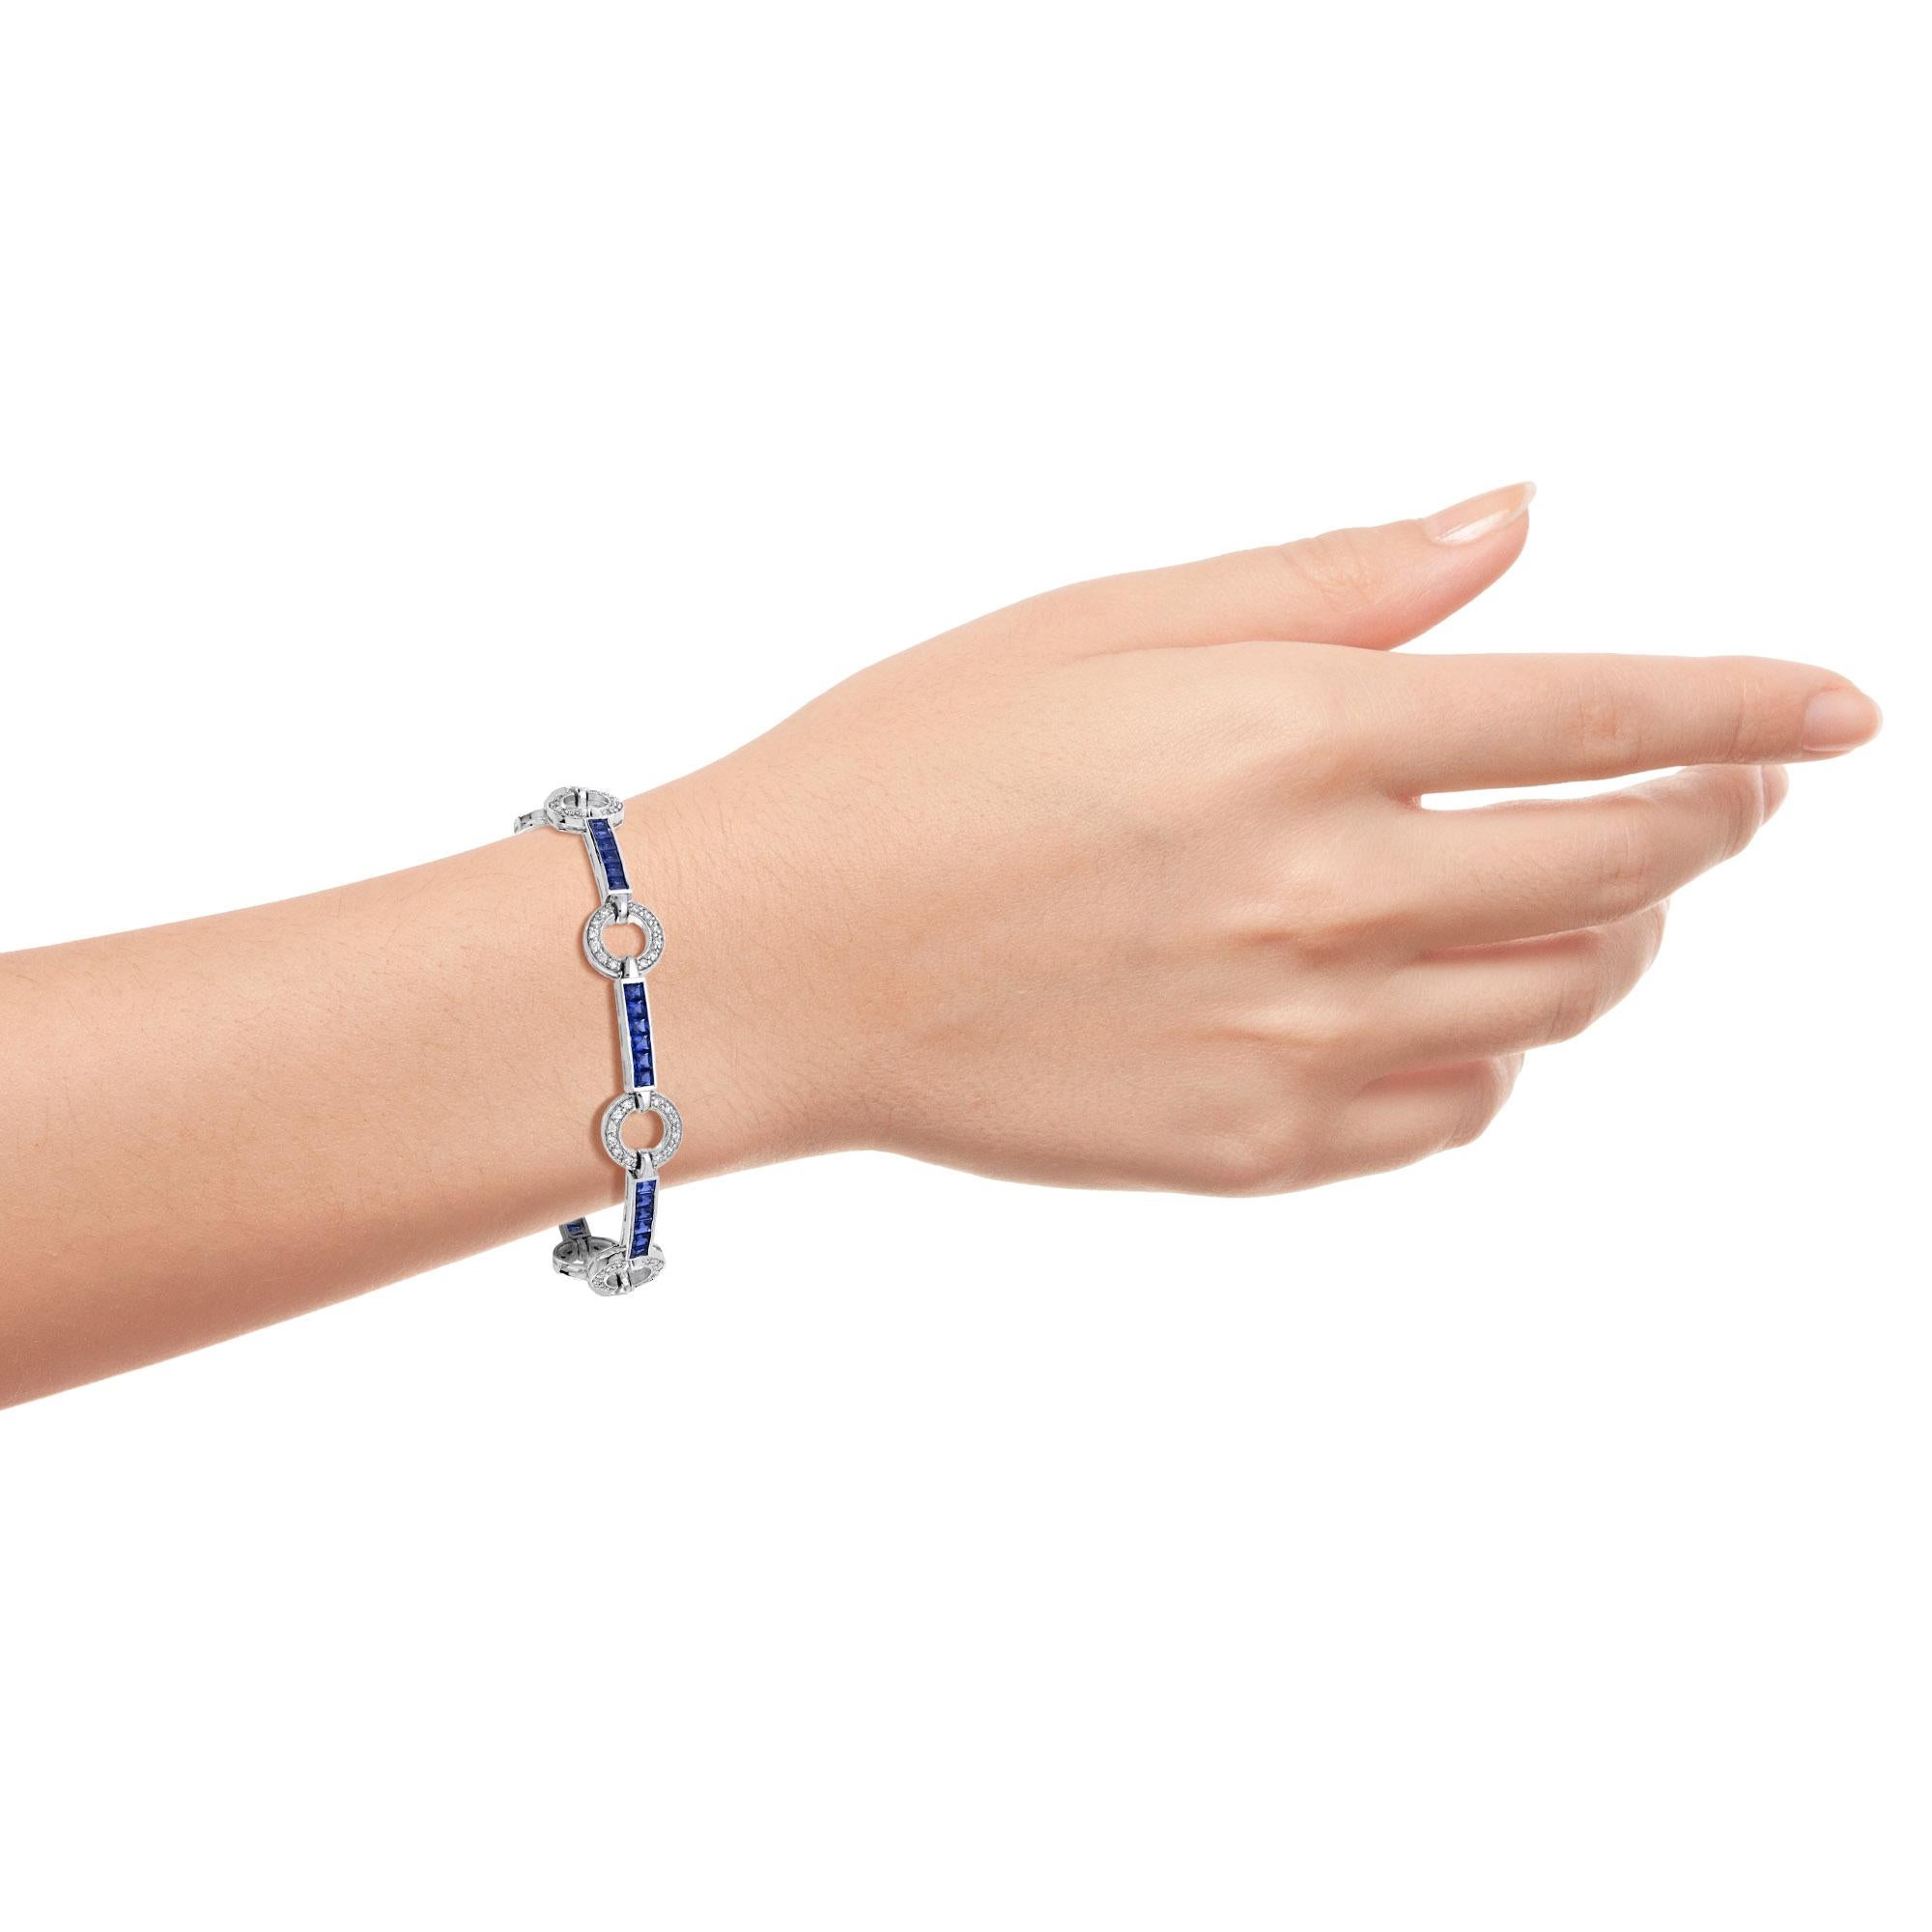 Handcrafted out of stunning blue sapphires and diamonds, this bracelet is perfect for evening or day wear. Each individual section features round diamonds and is separated from its neighbor with a sapphire line. This wonderful piece is a must-have